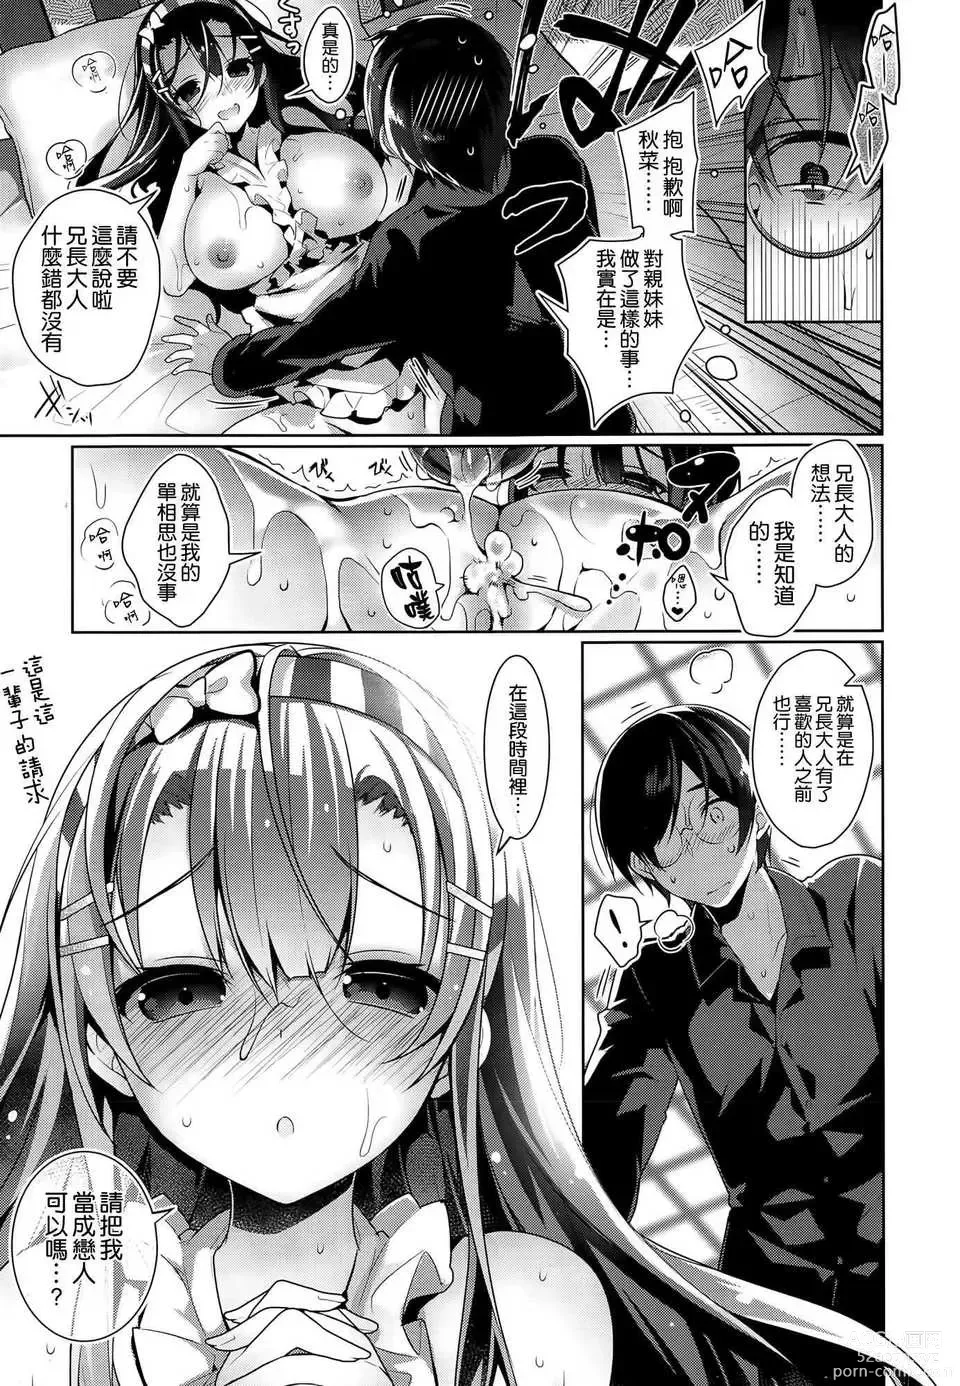 Page 27 of manga Aki na Dere - Mysterious the forbidden carnal relationship